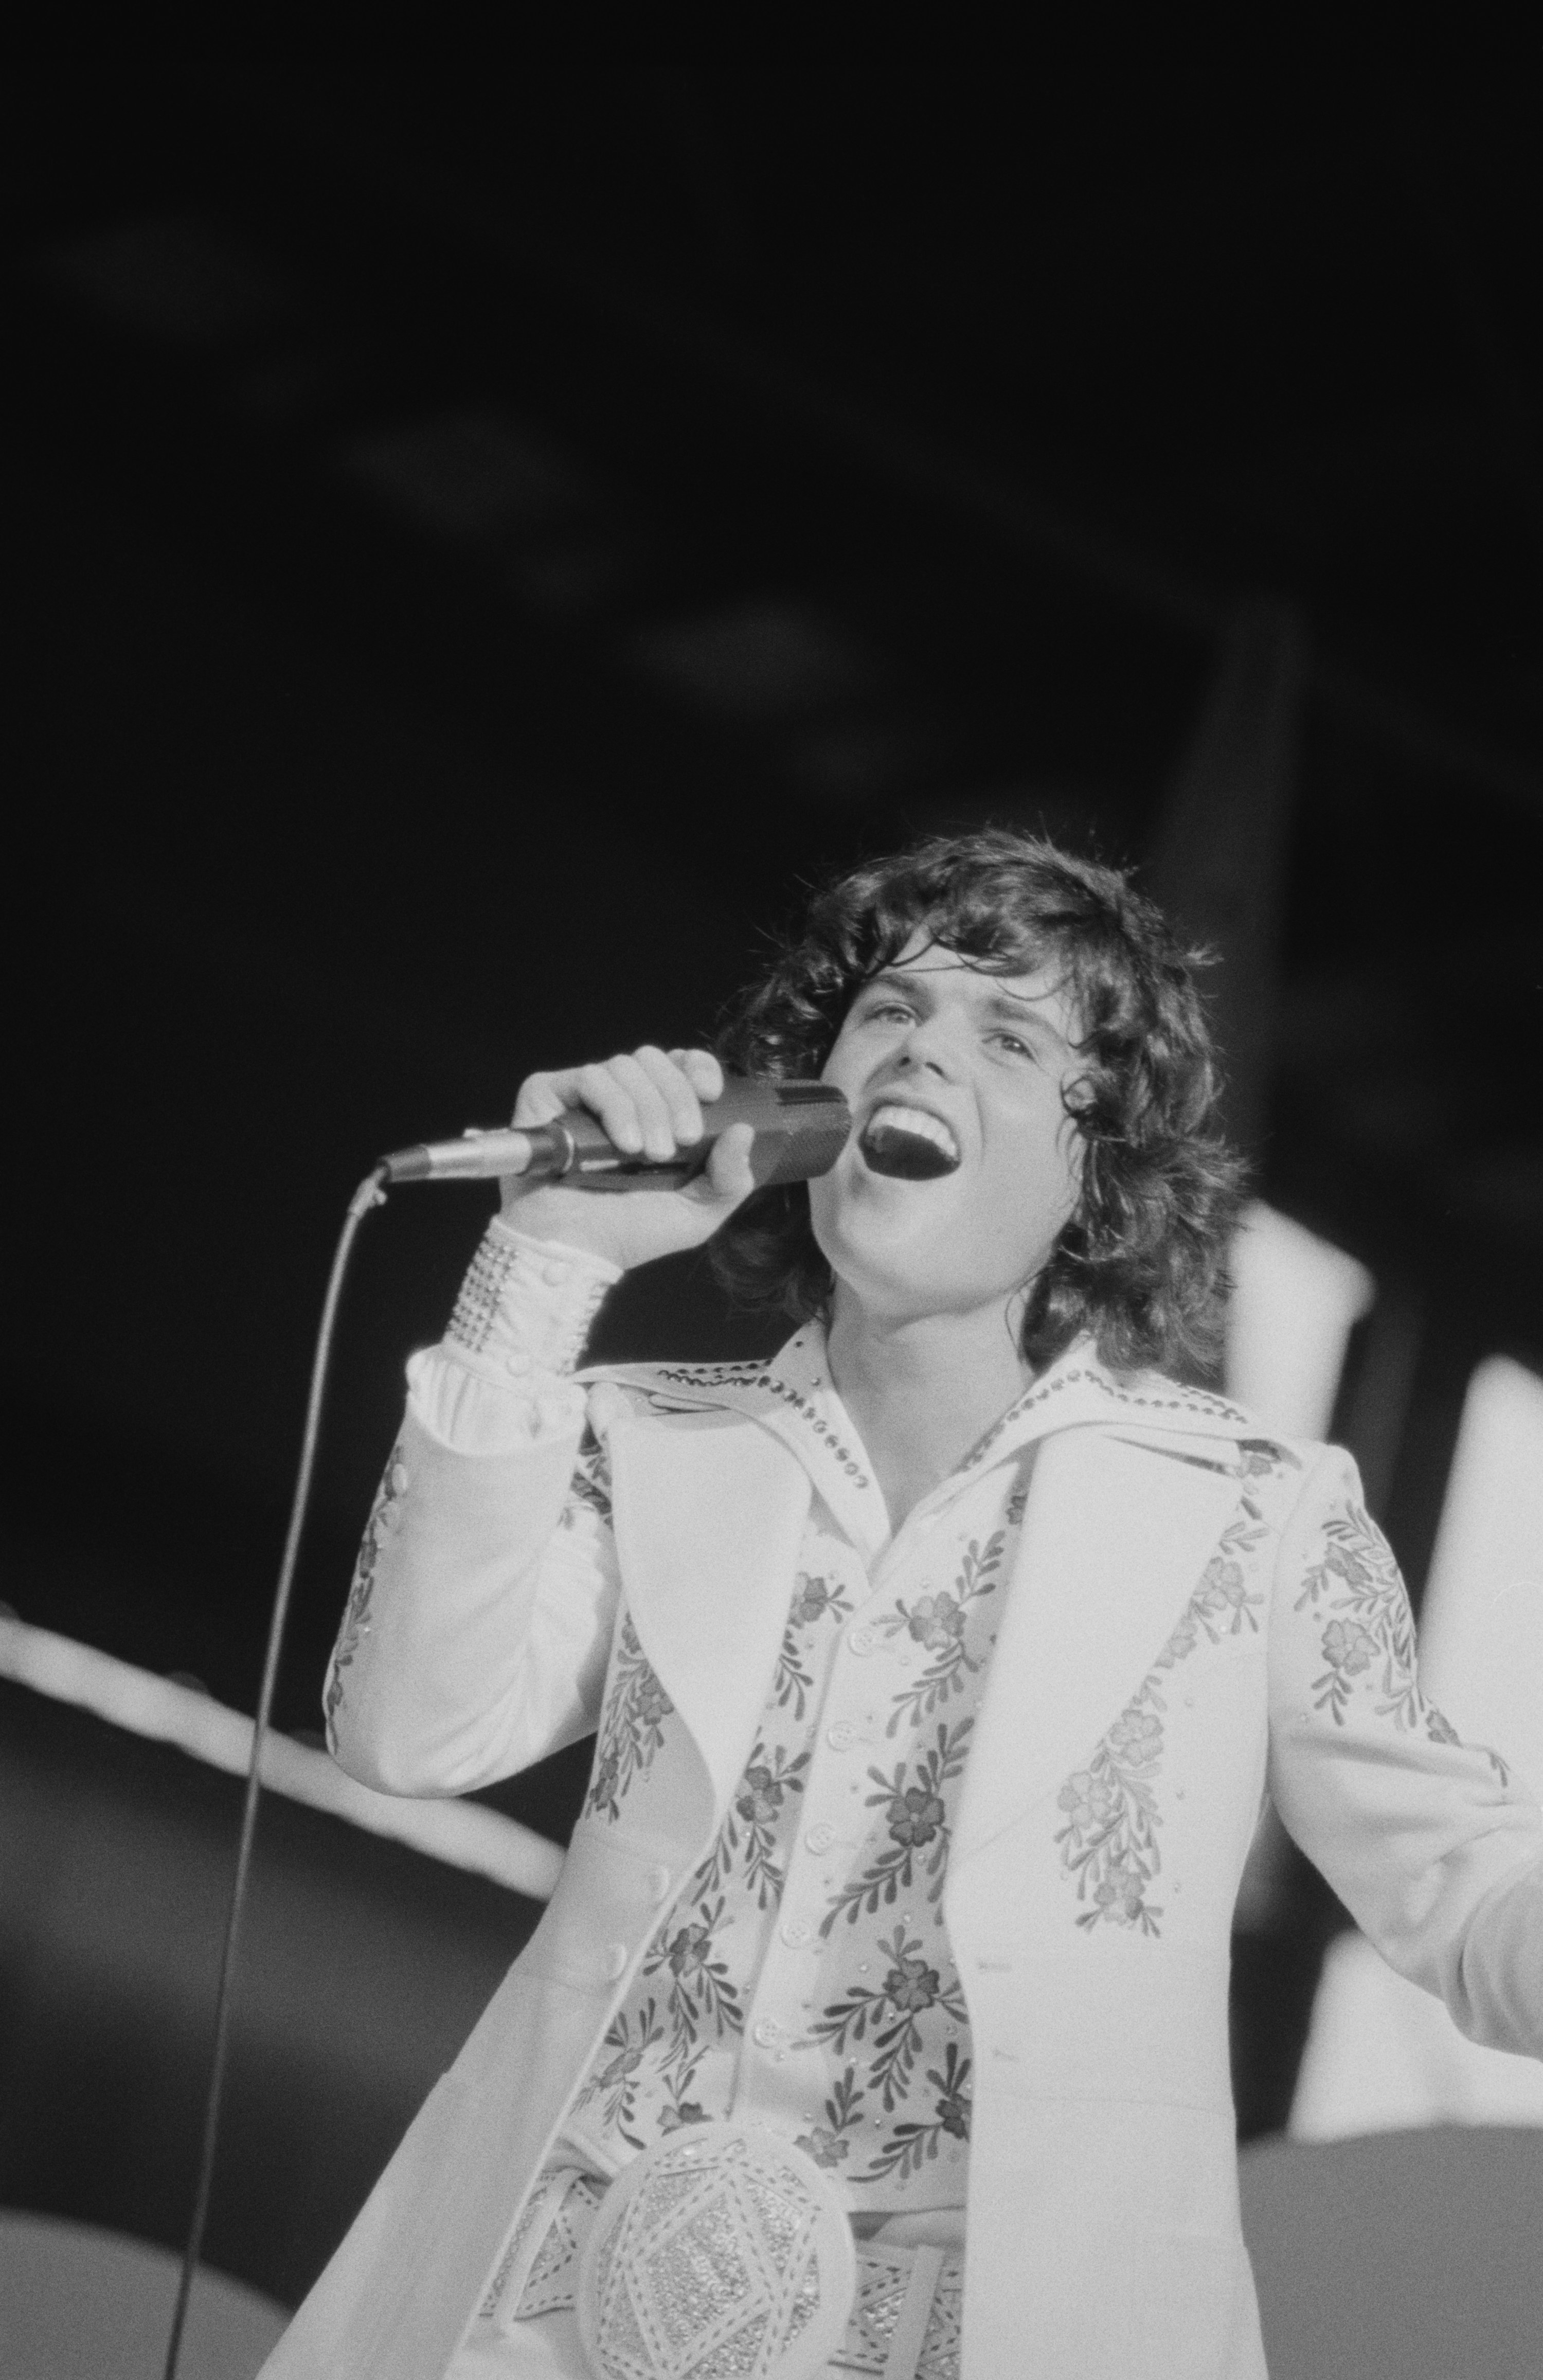 Donny on stage in 1975